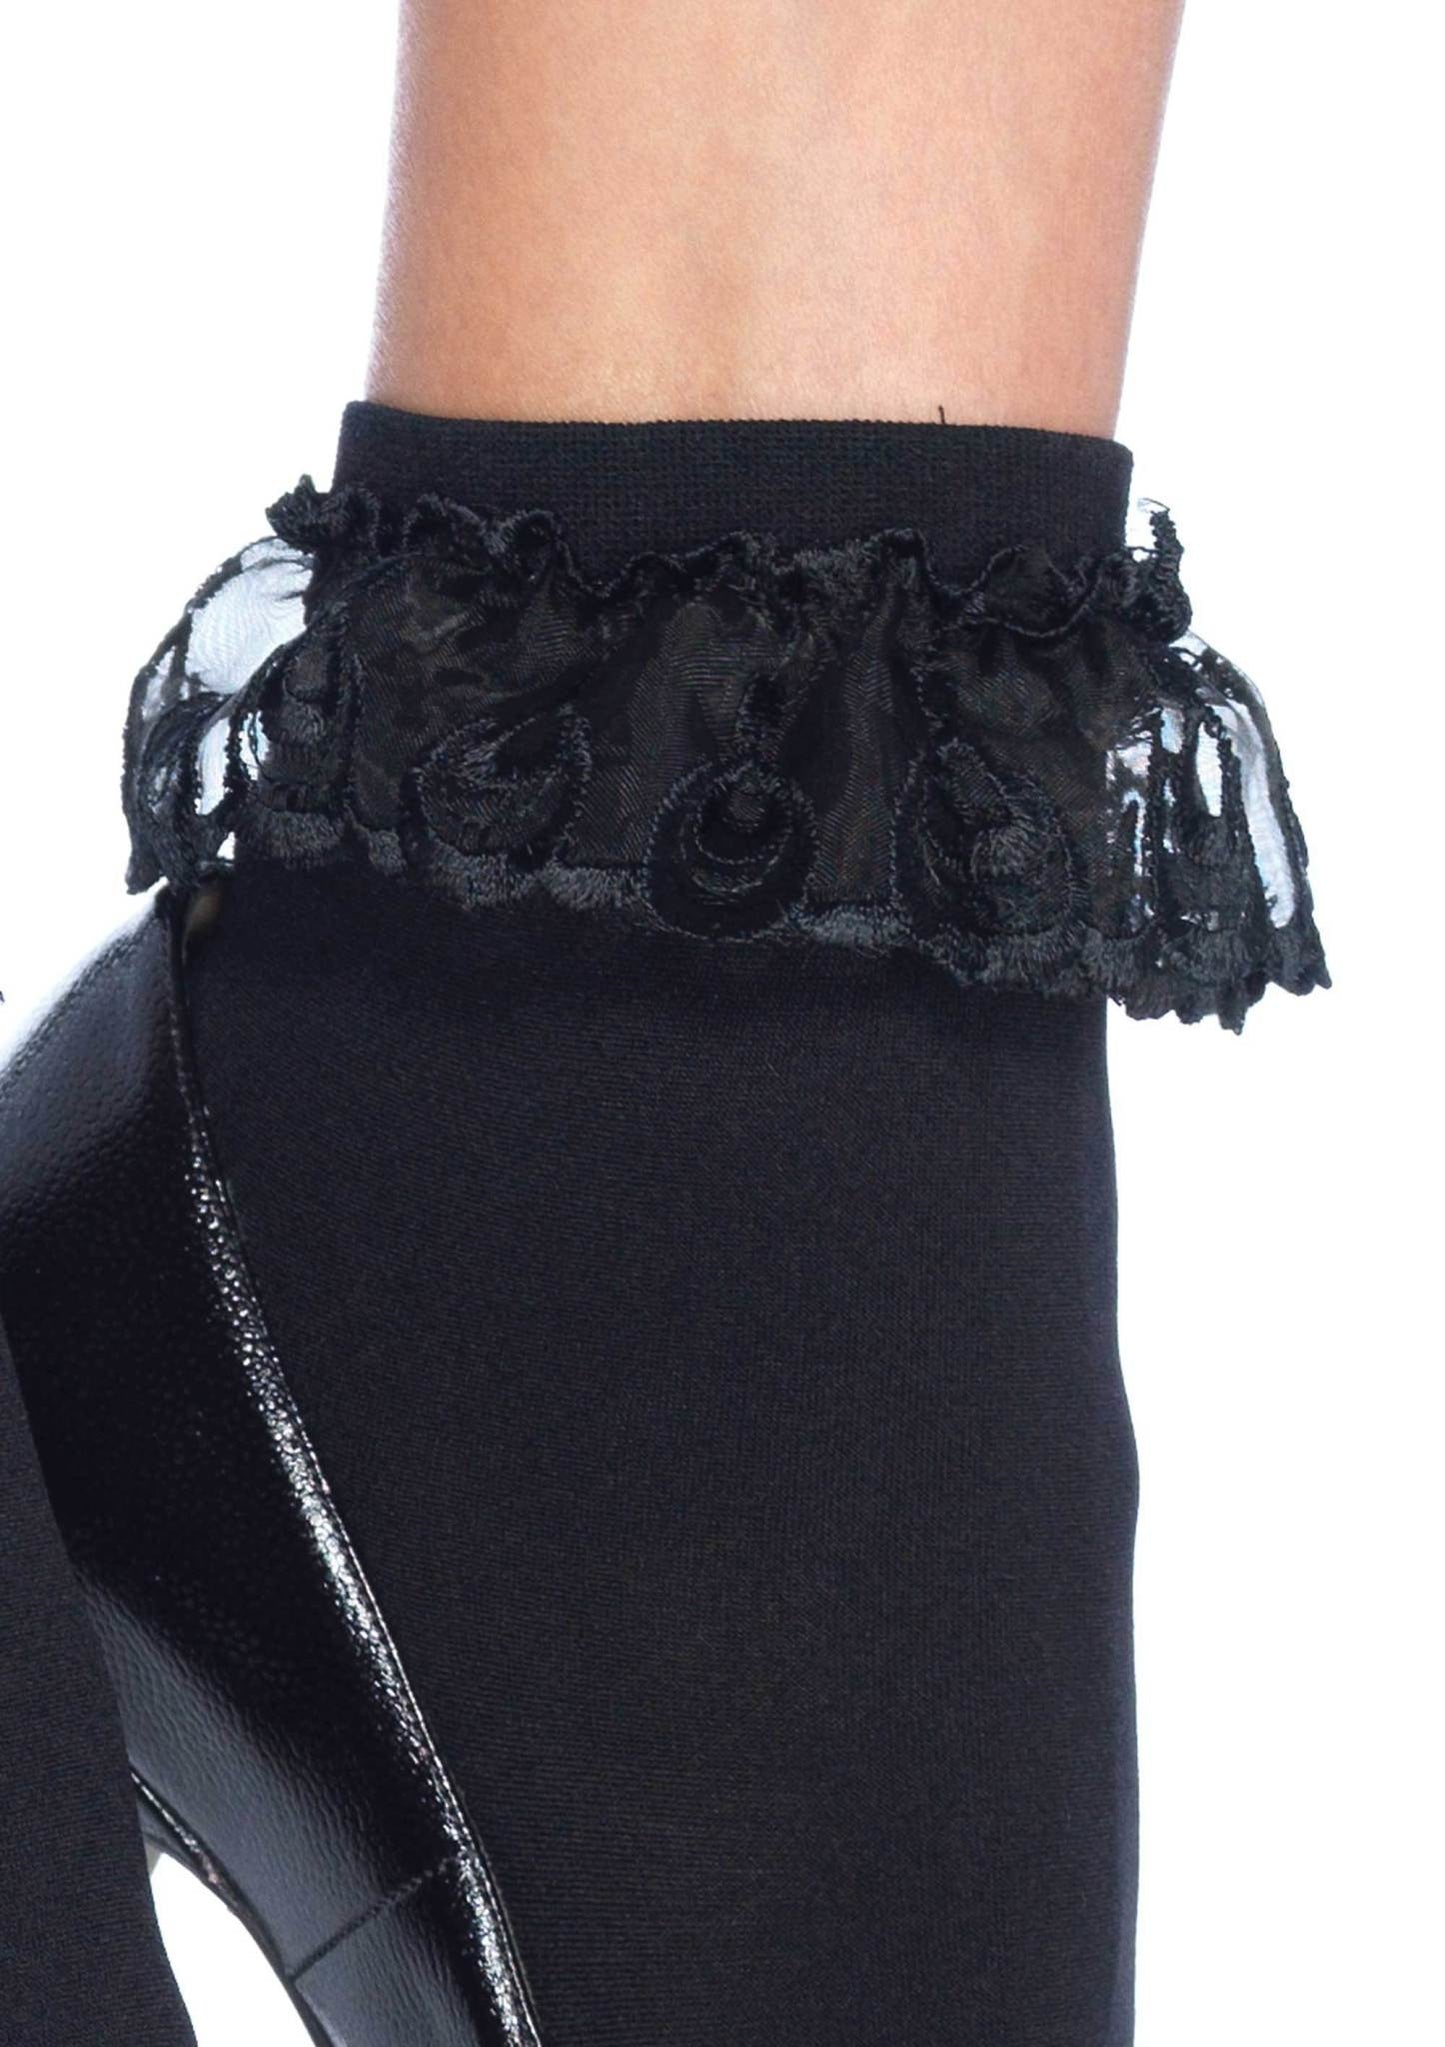 Anklet w/ Lace Ruffle